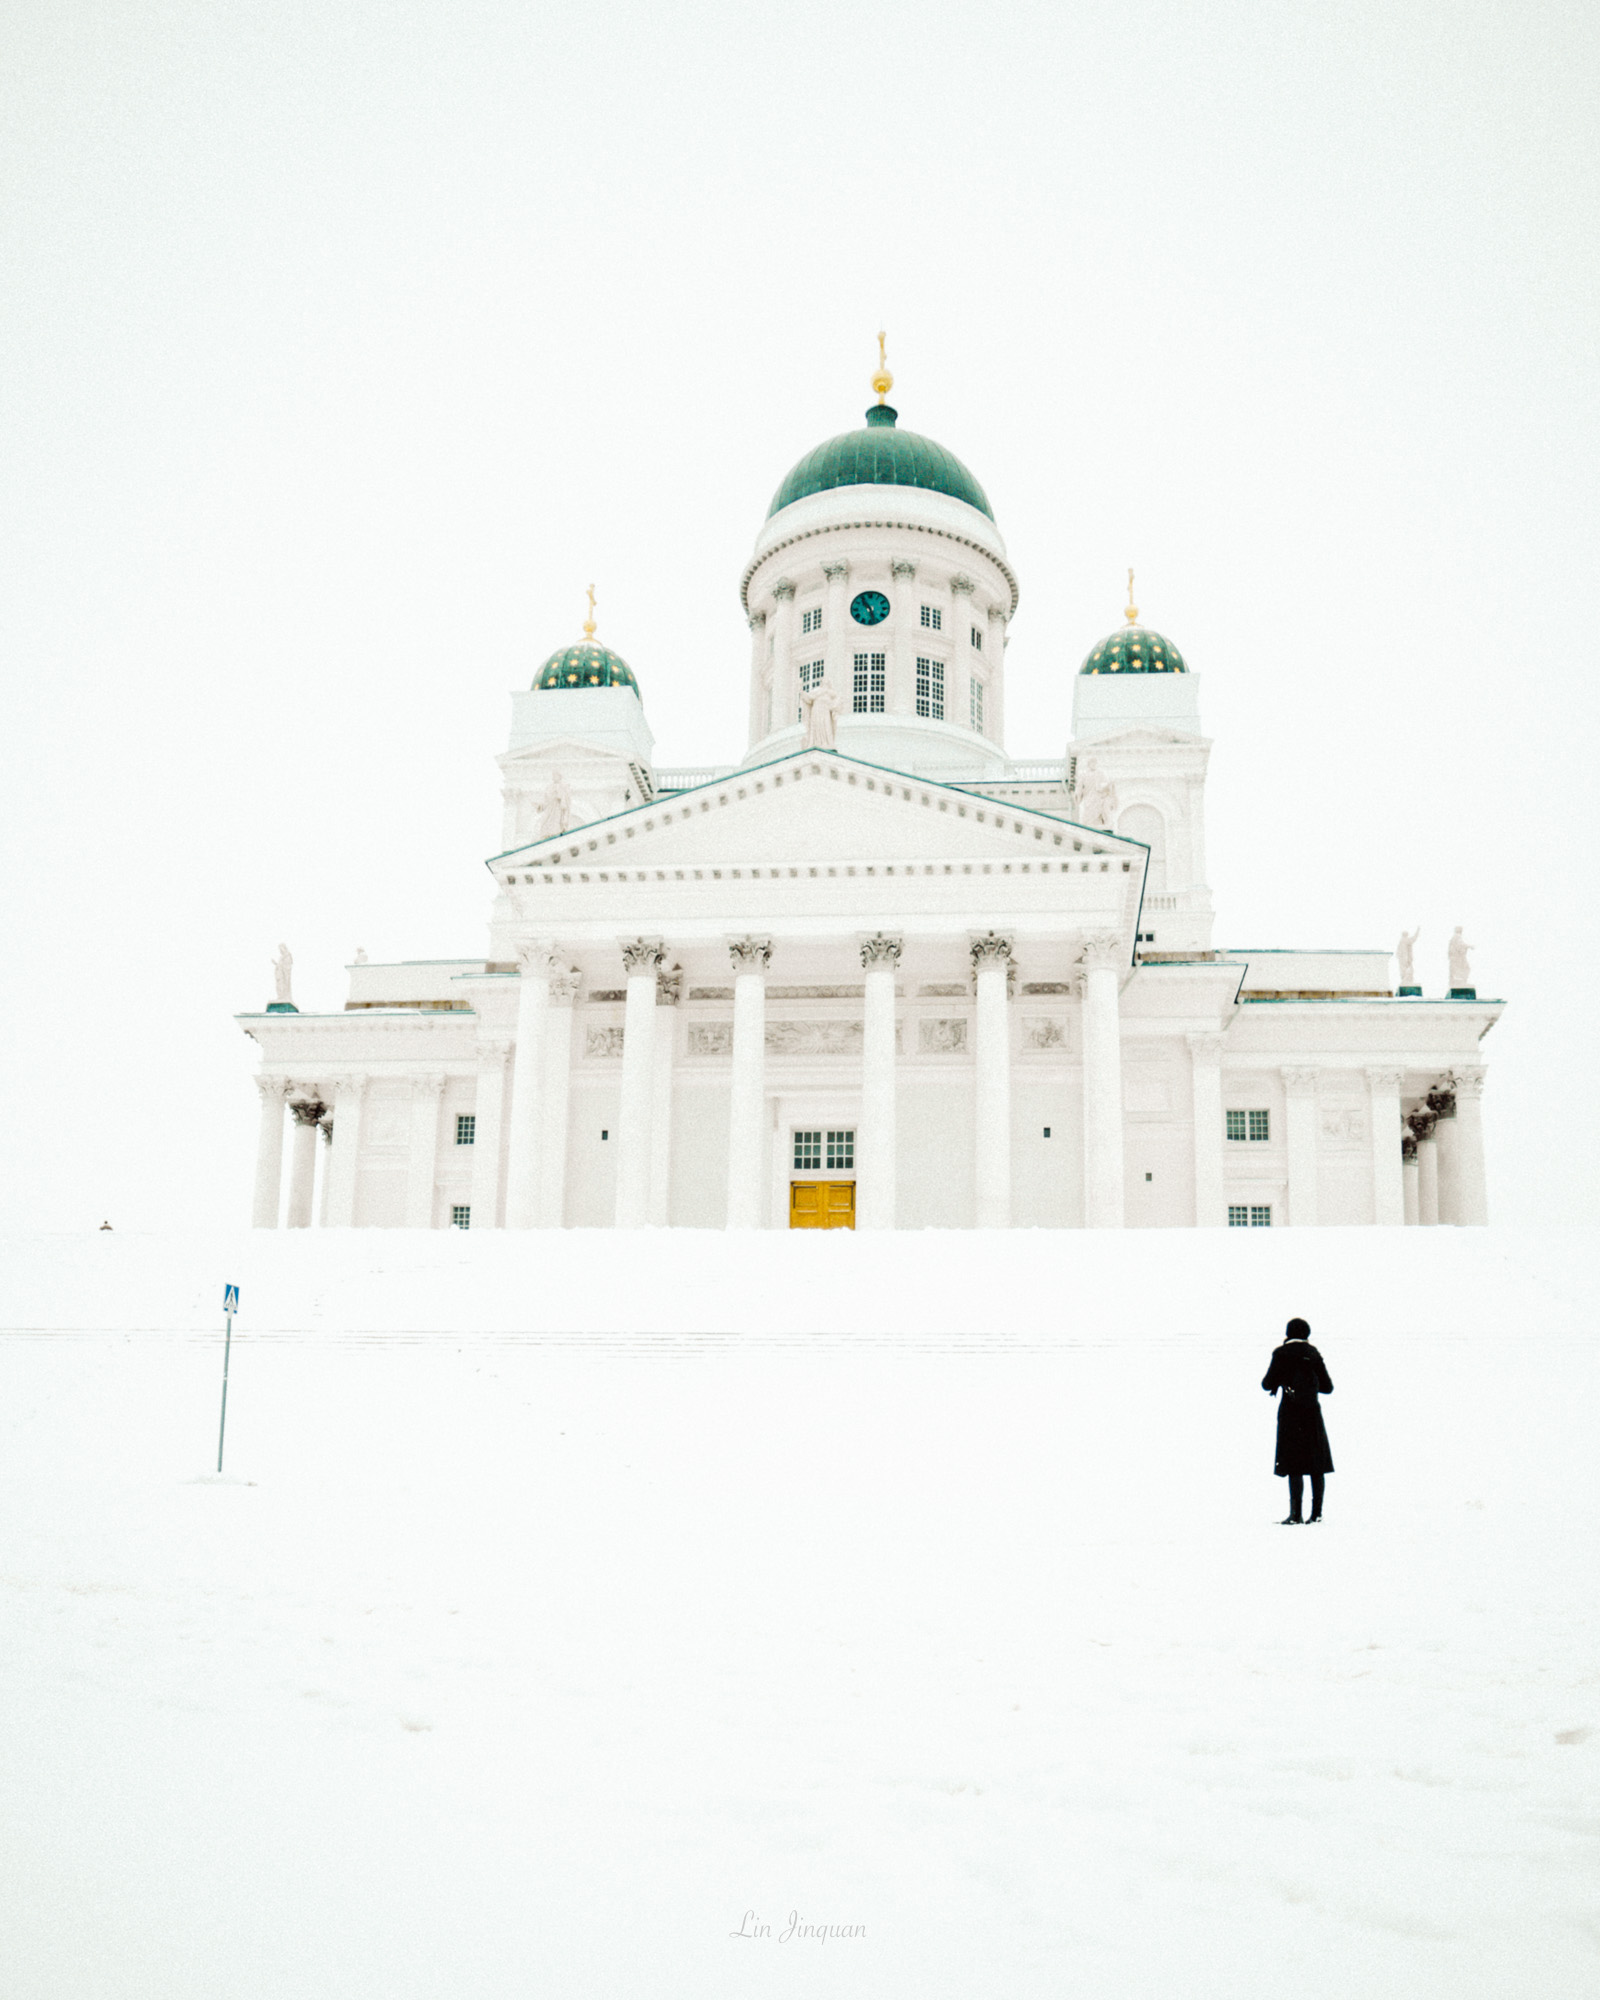 The white church is embraced by white.